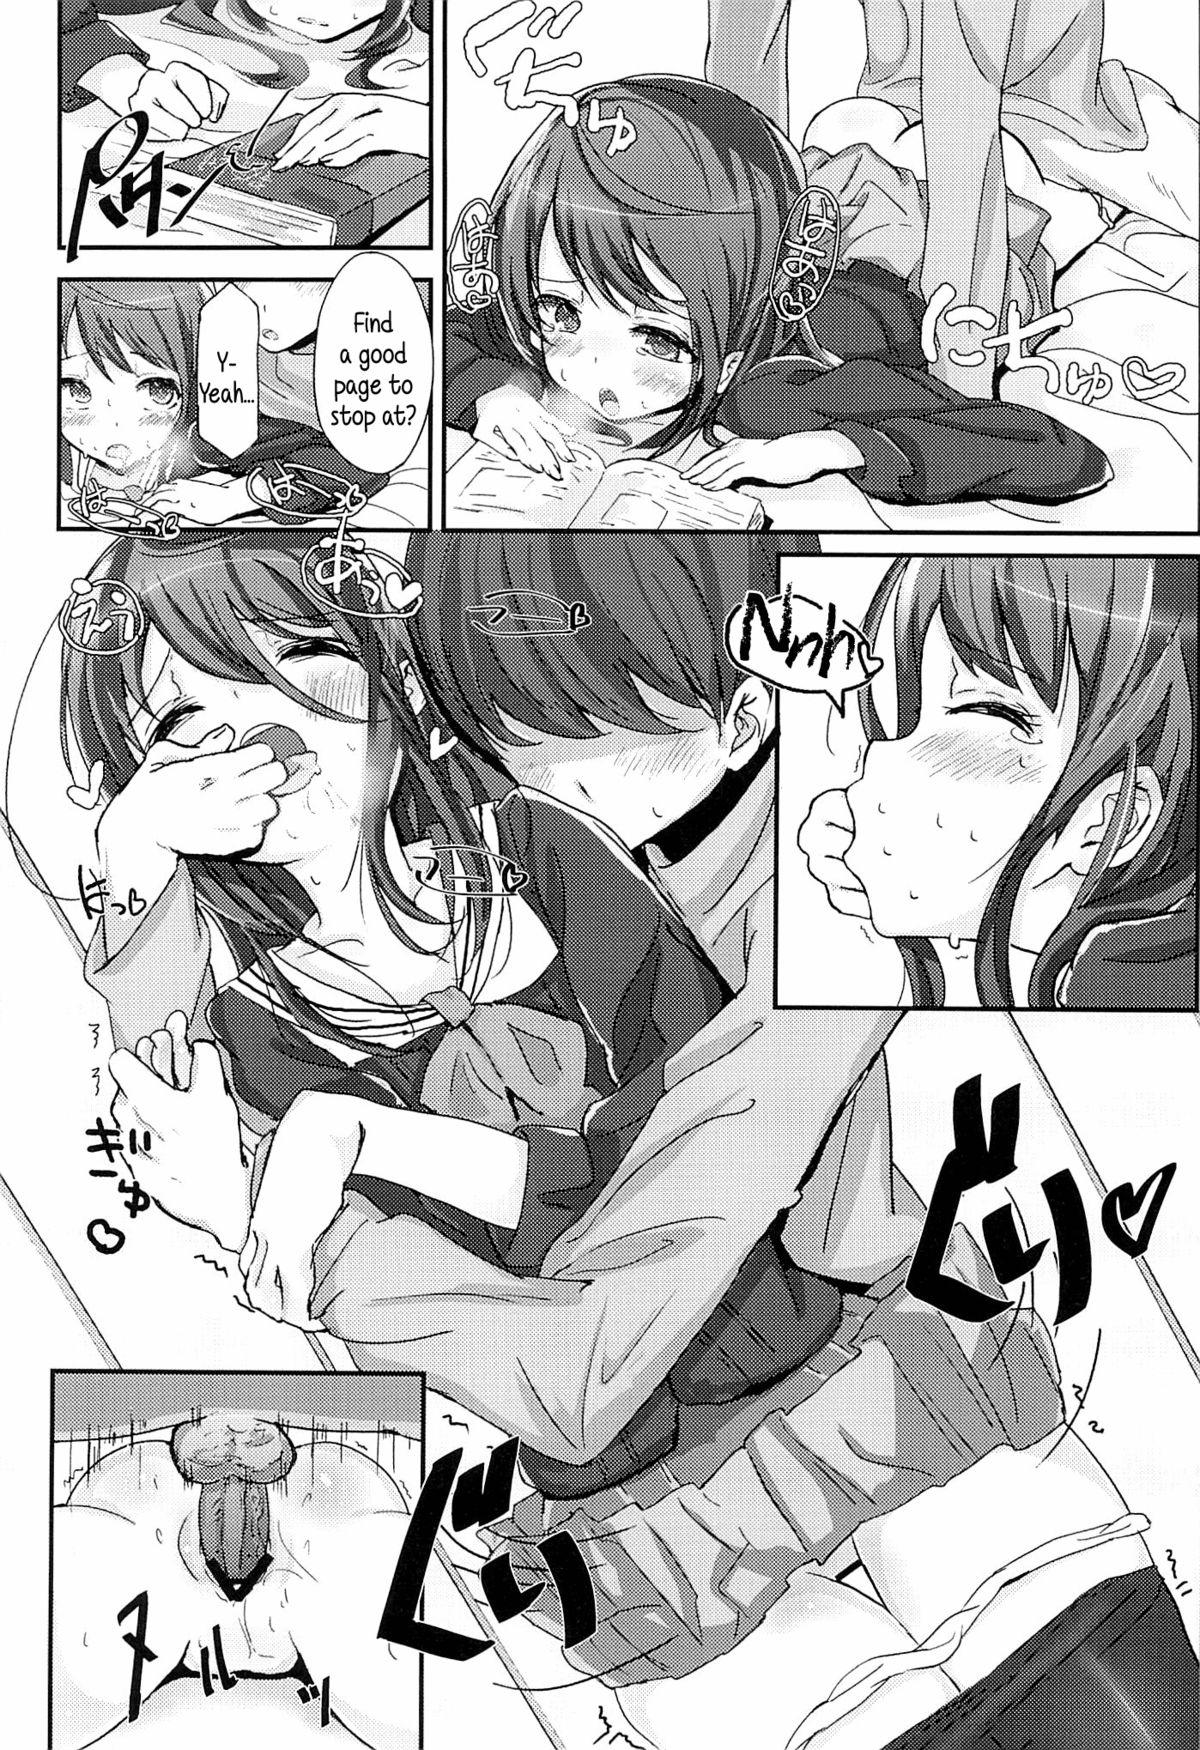 Shikyuukou no Kanata, Onii chan no Hate | Beyond the mouth of the uterus lies Onii-chan’s demise 6